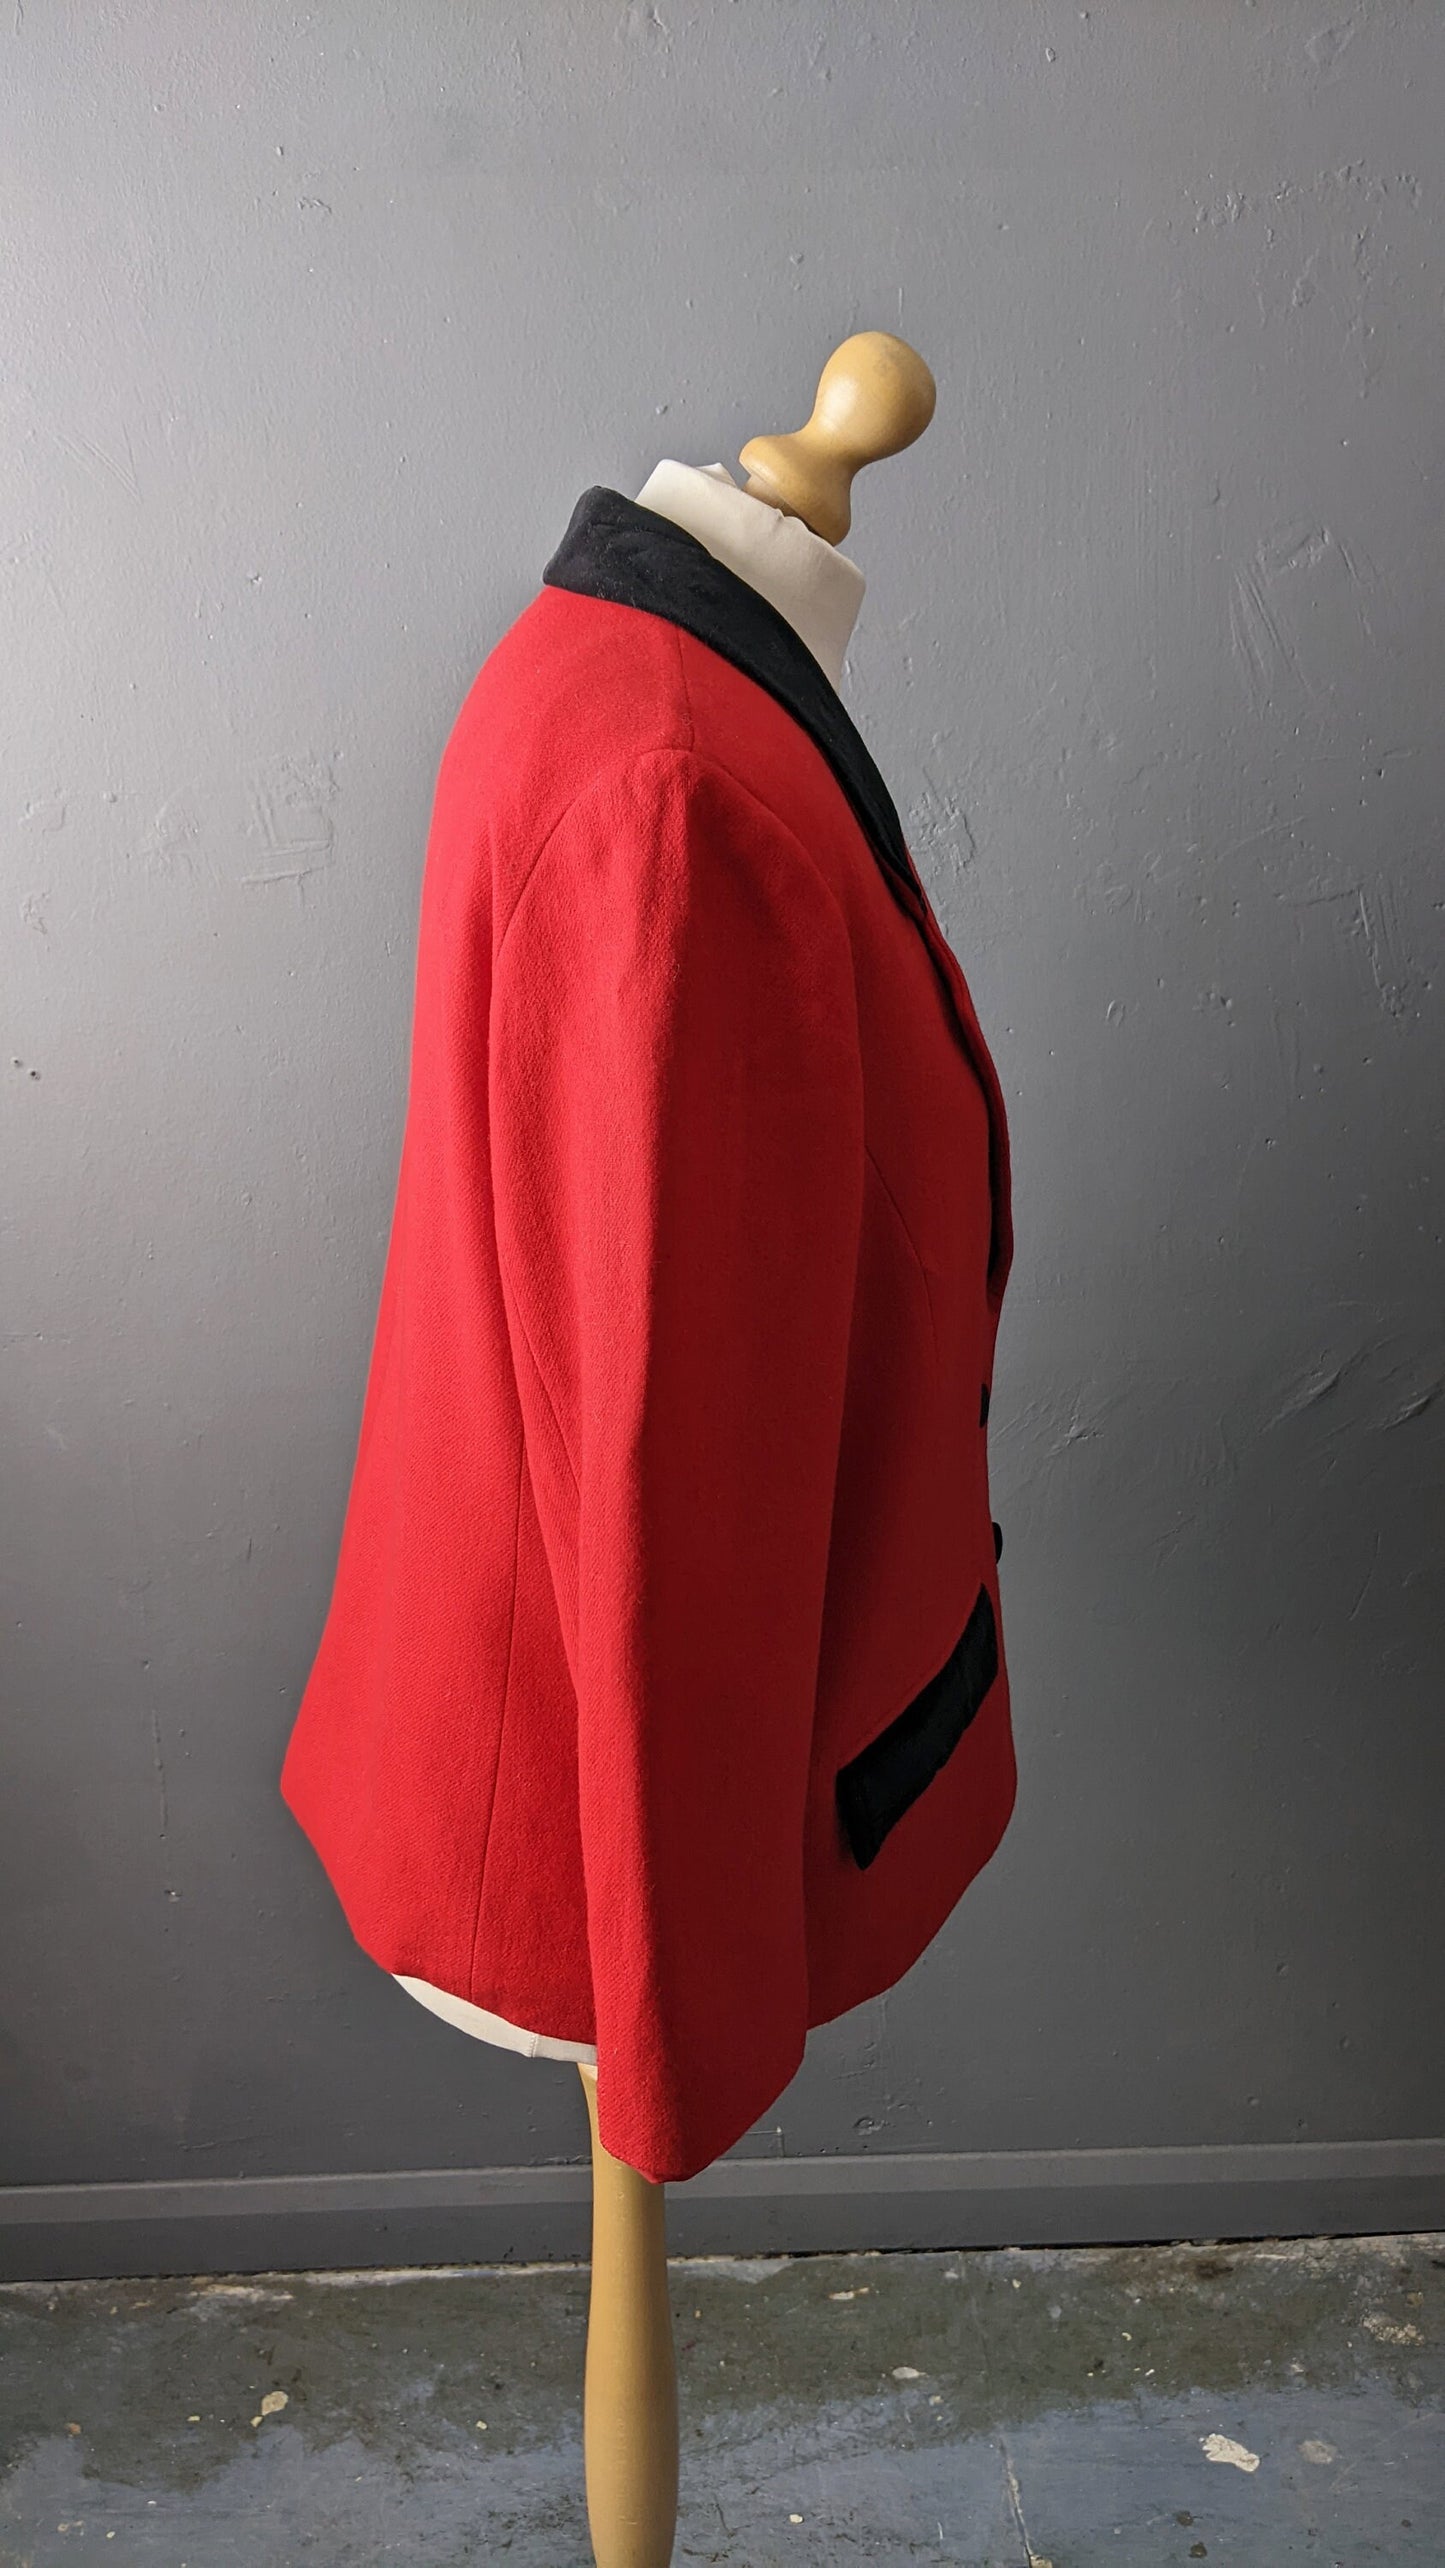 90s Equestrian Style Jacket by Panther Woman, Fitted Show Blazer, Plus Size XL